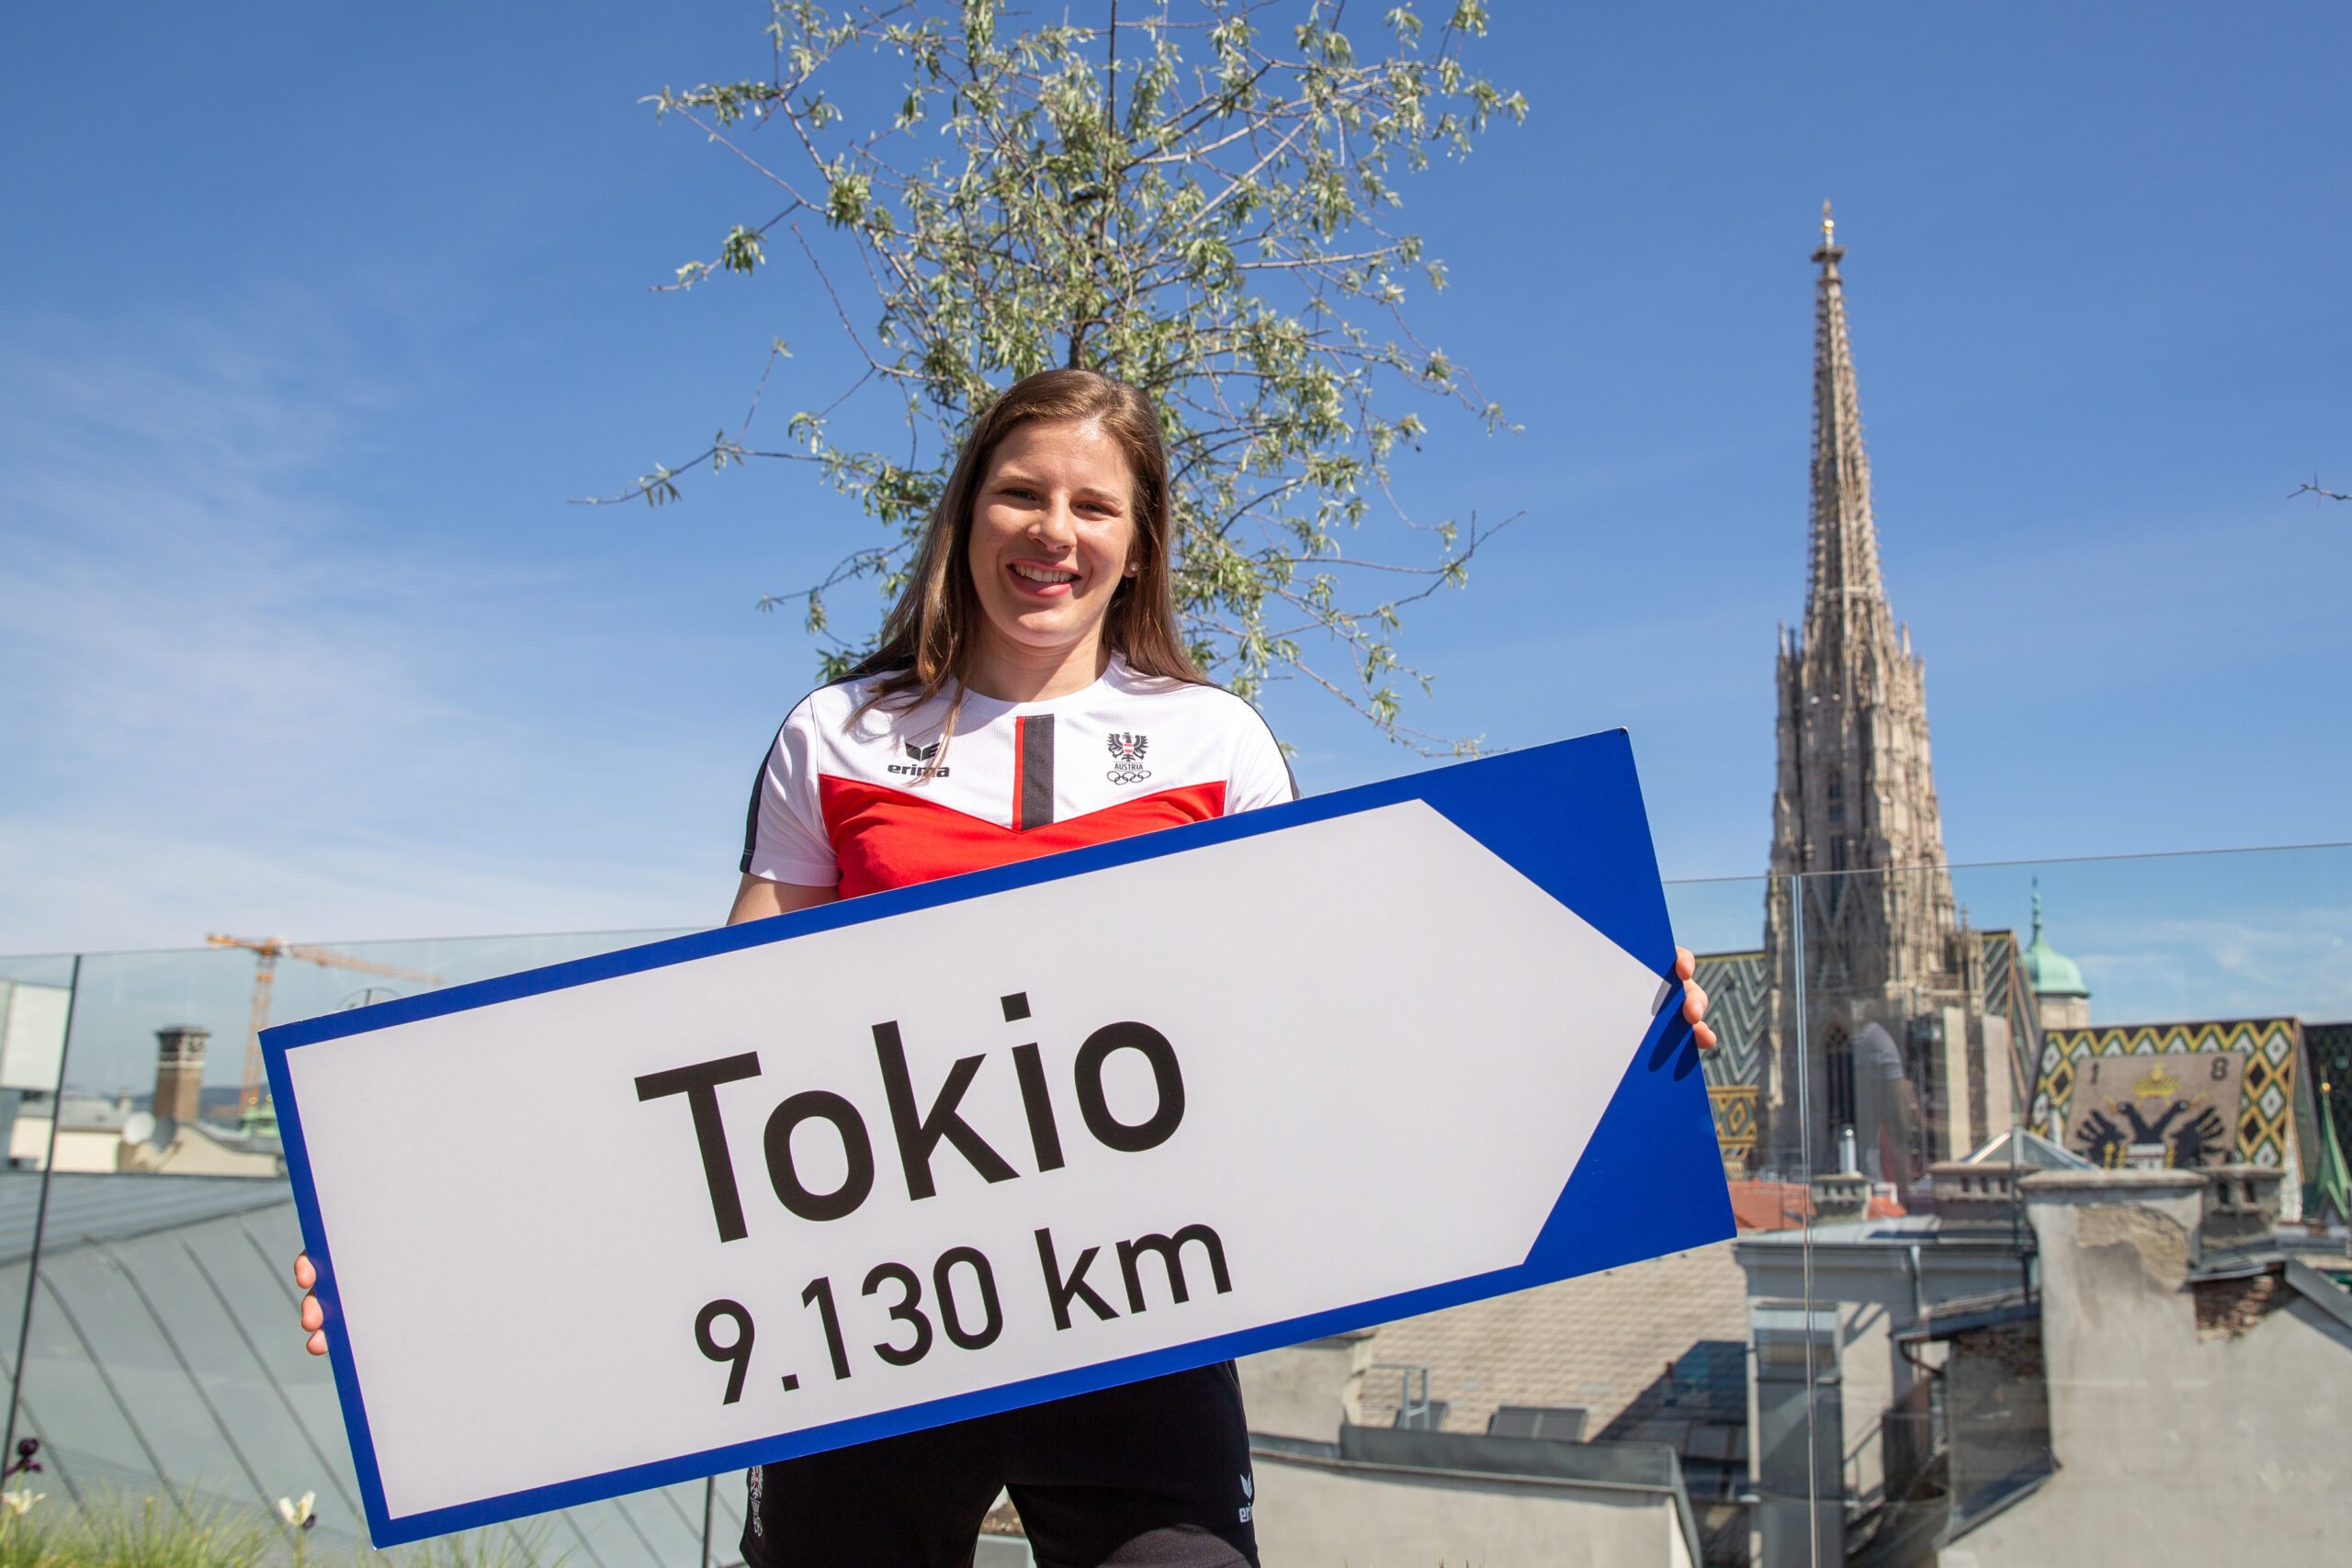 VIENNA,AUSTRIA,04.MAY.21 - OLYMPICS, PARALYMPICS - OEOC, OEPC, presentation collection Tokyo 2020, press conference. Image shows Bernadette Graf (AUT).